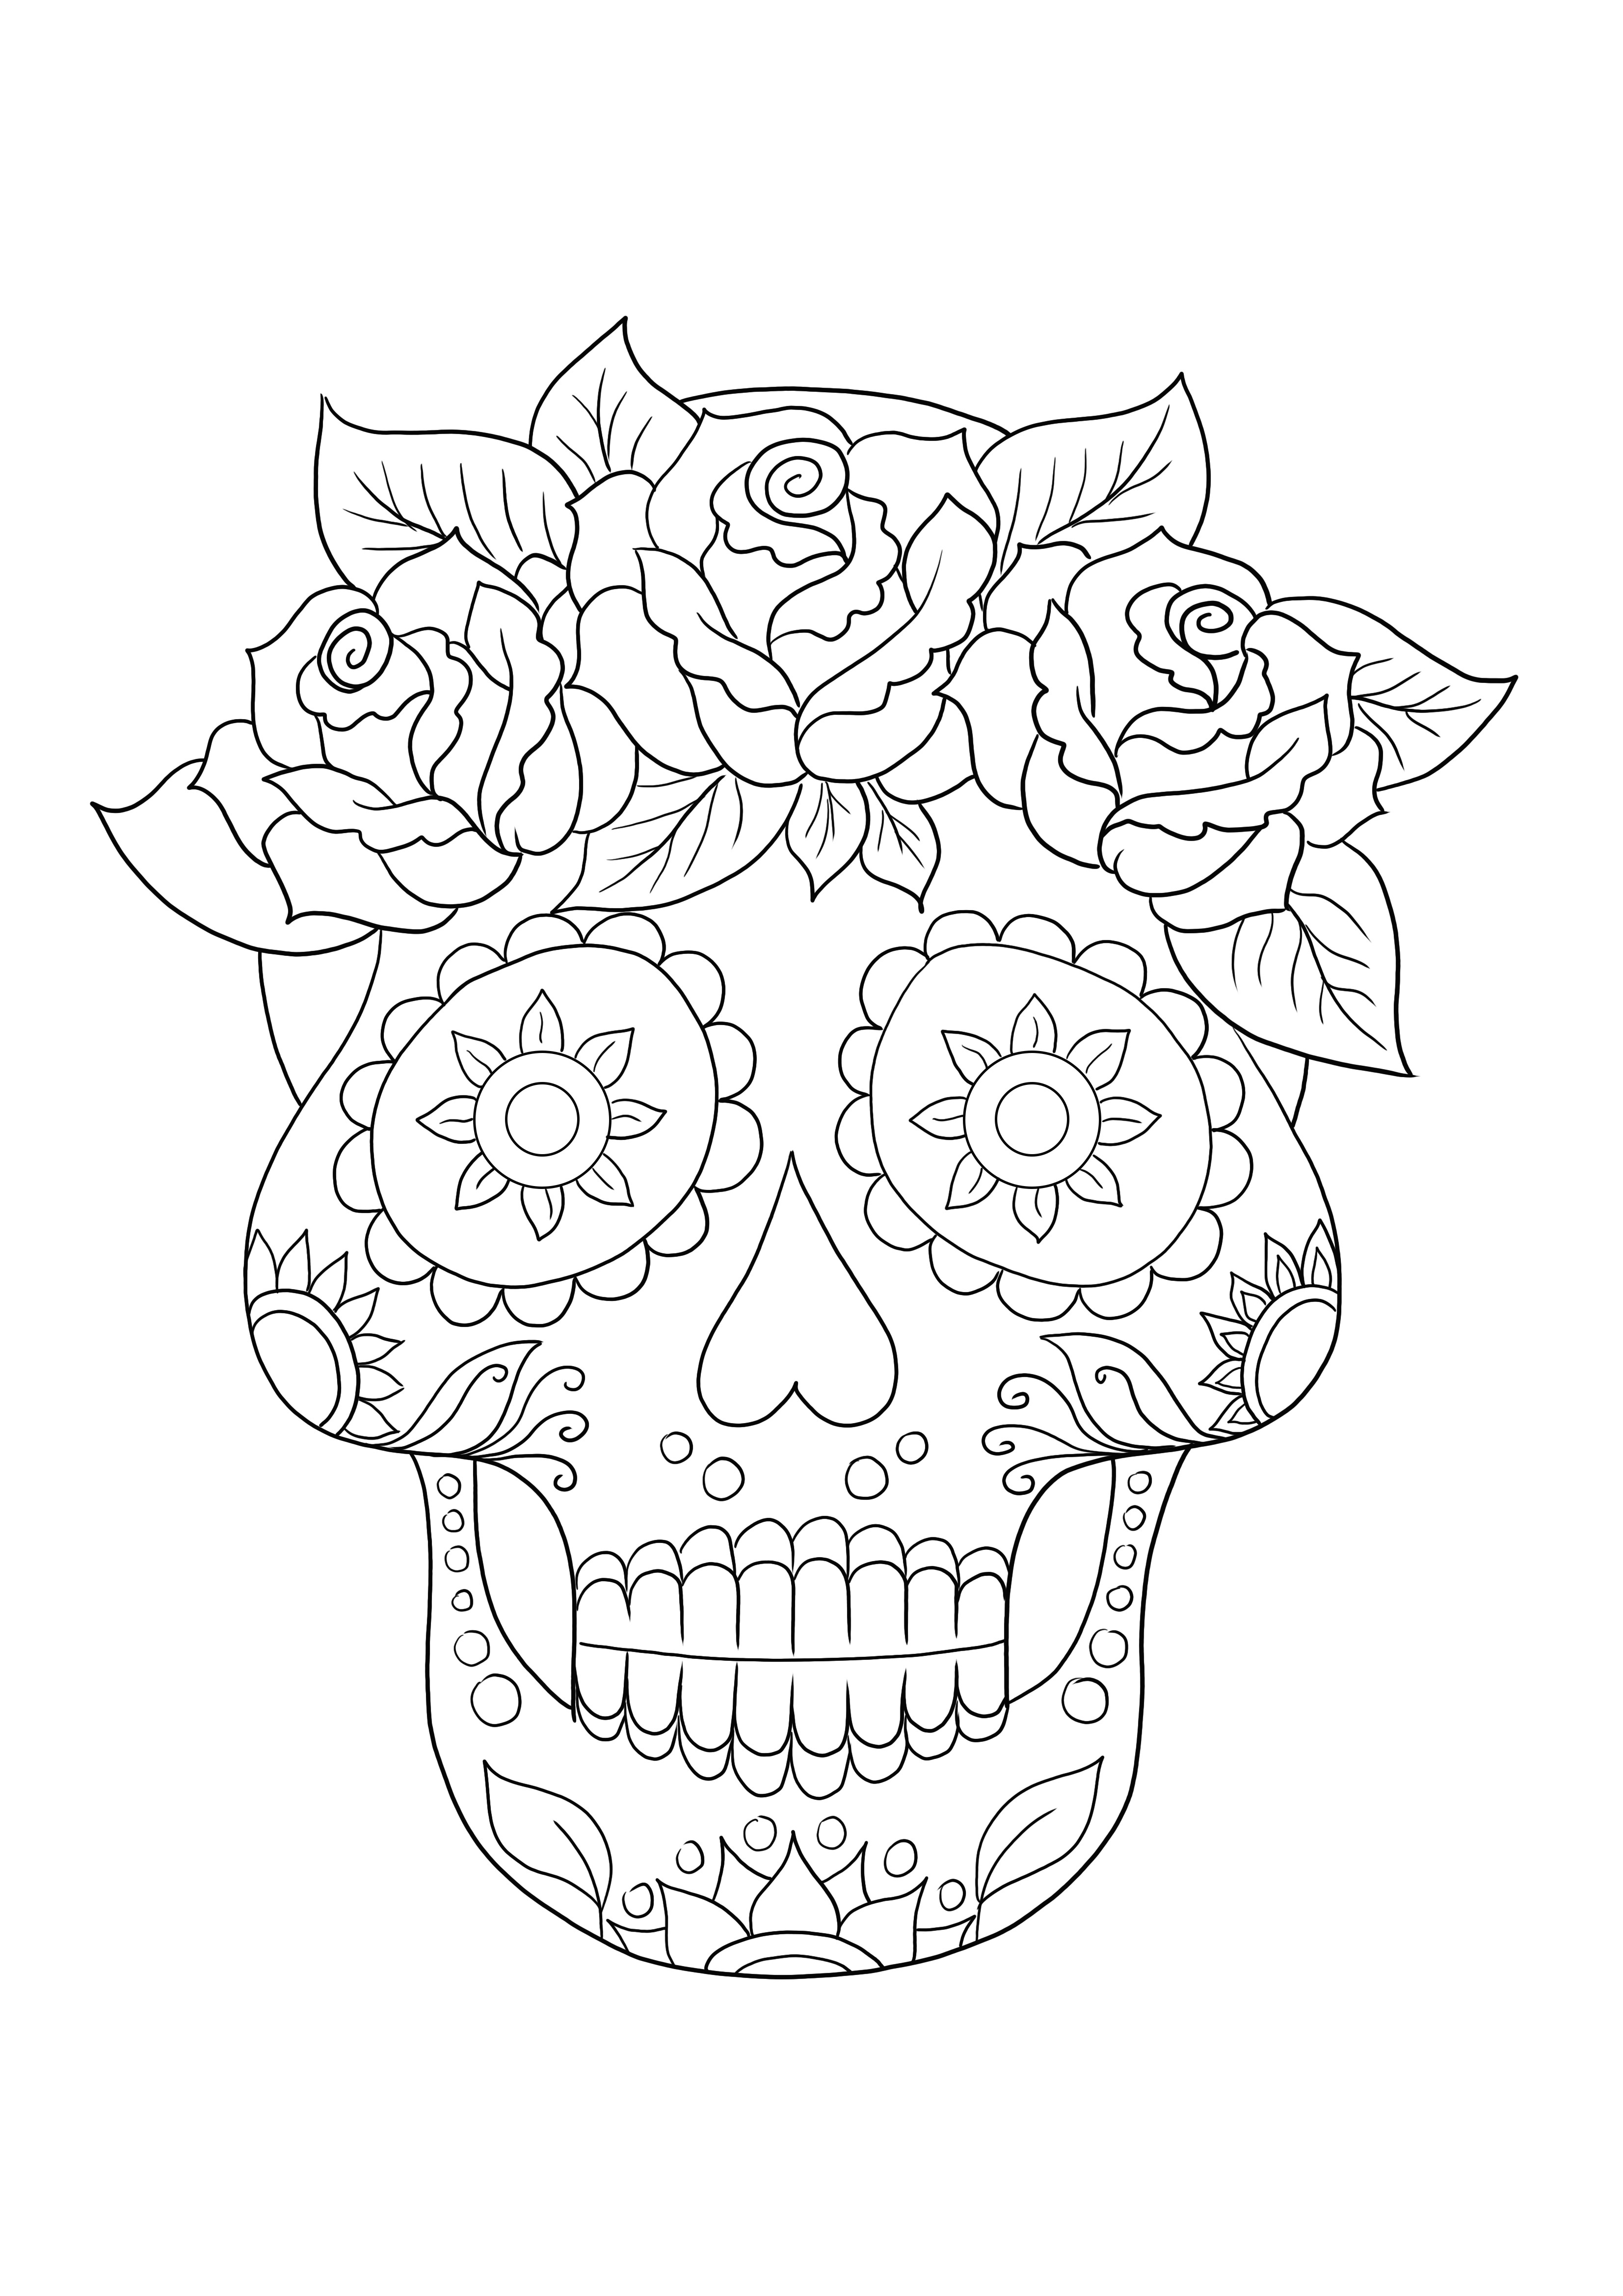 An original Sugar Skull free coloring sheet to be printed and used to teach about unconventional art